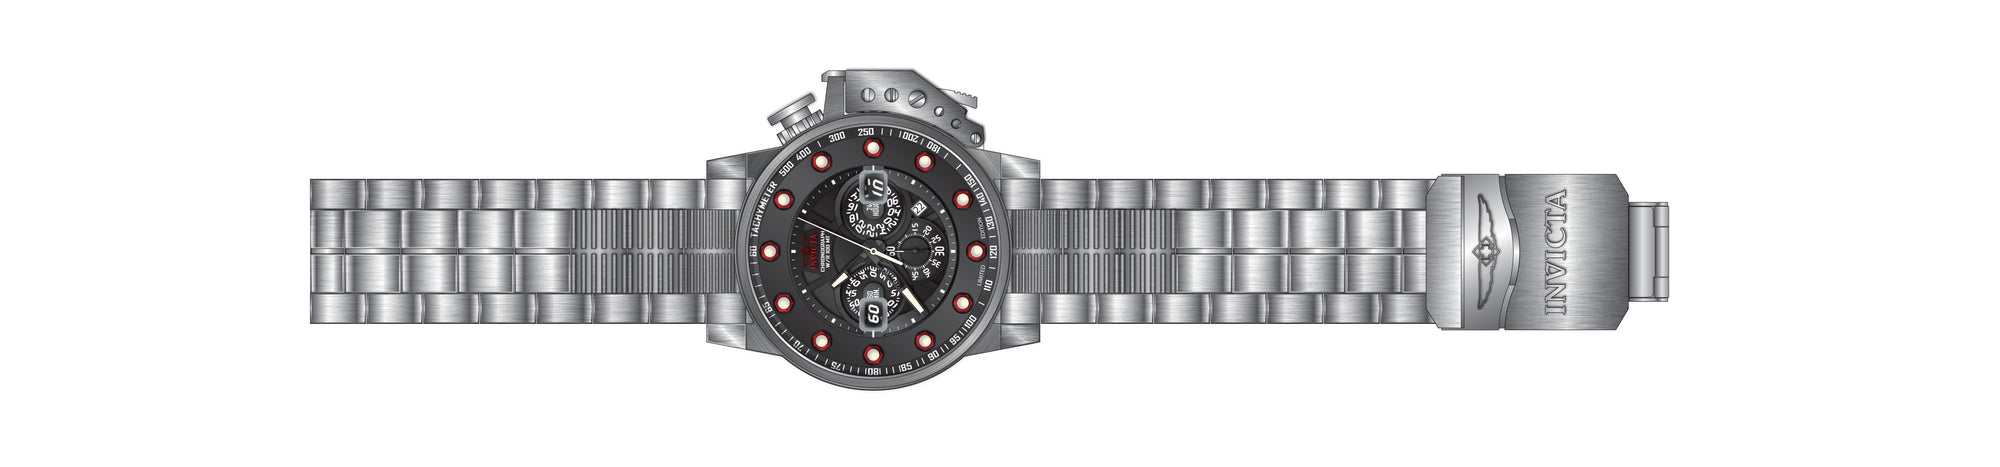 Band for Invicta I Force 30638